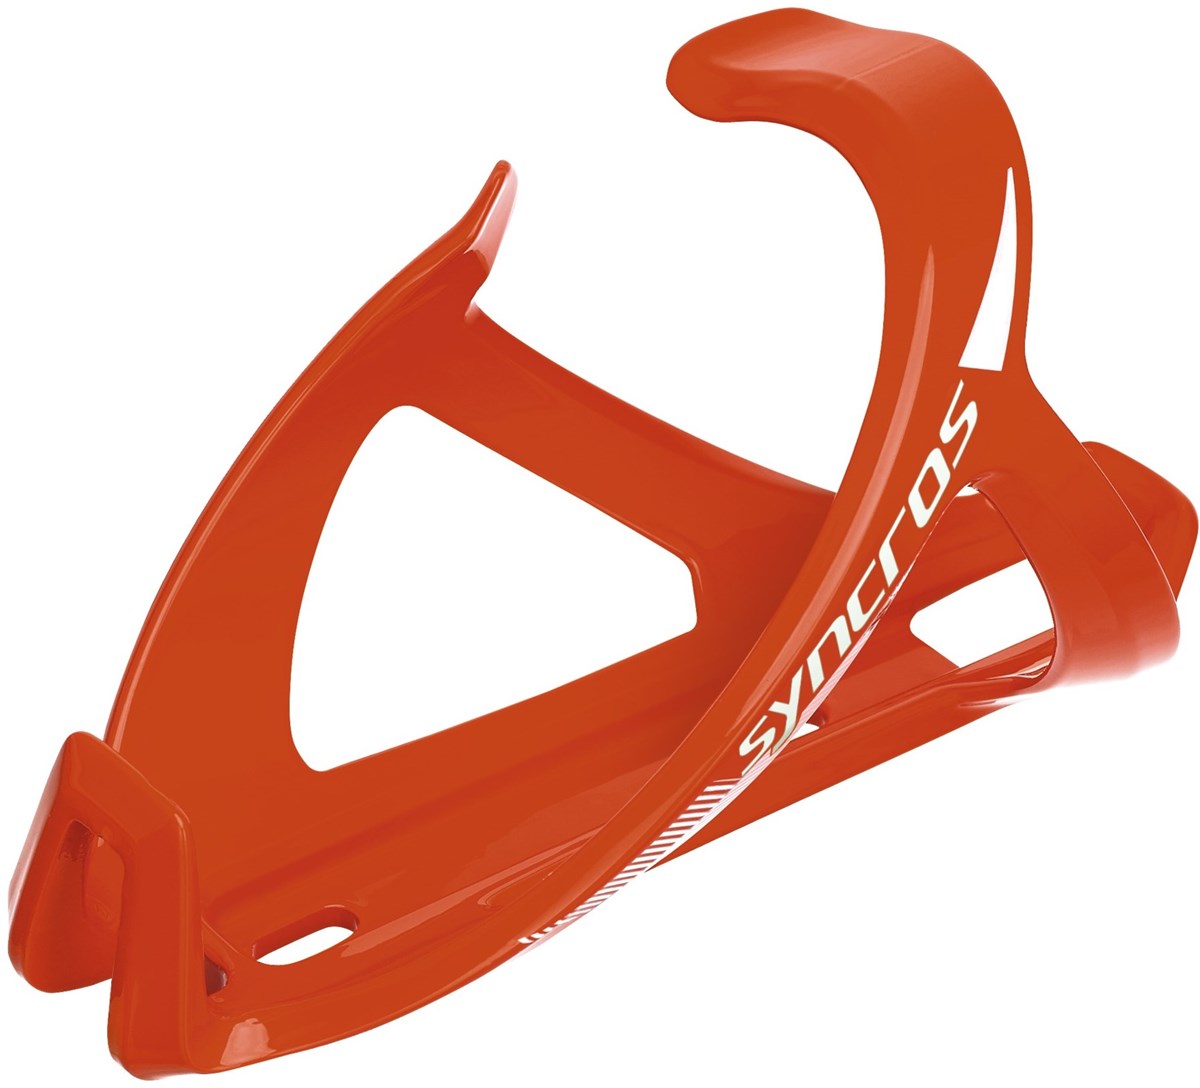 Syncros Tailor Cage 2.0 Left Bottle Cage 2014 - Bottles and Cages product image